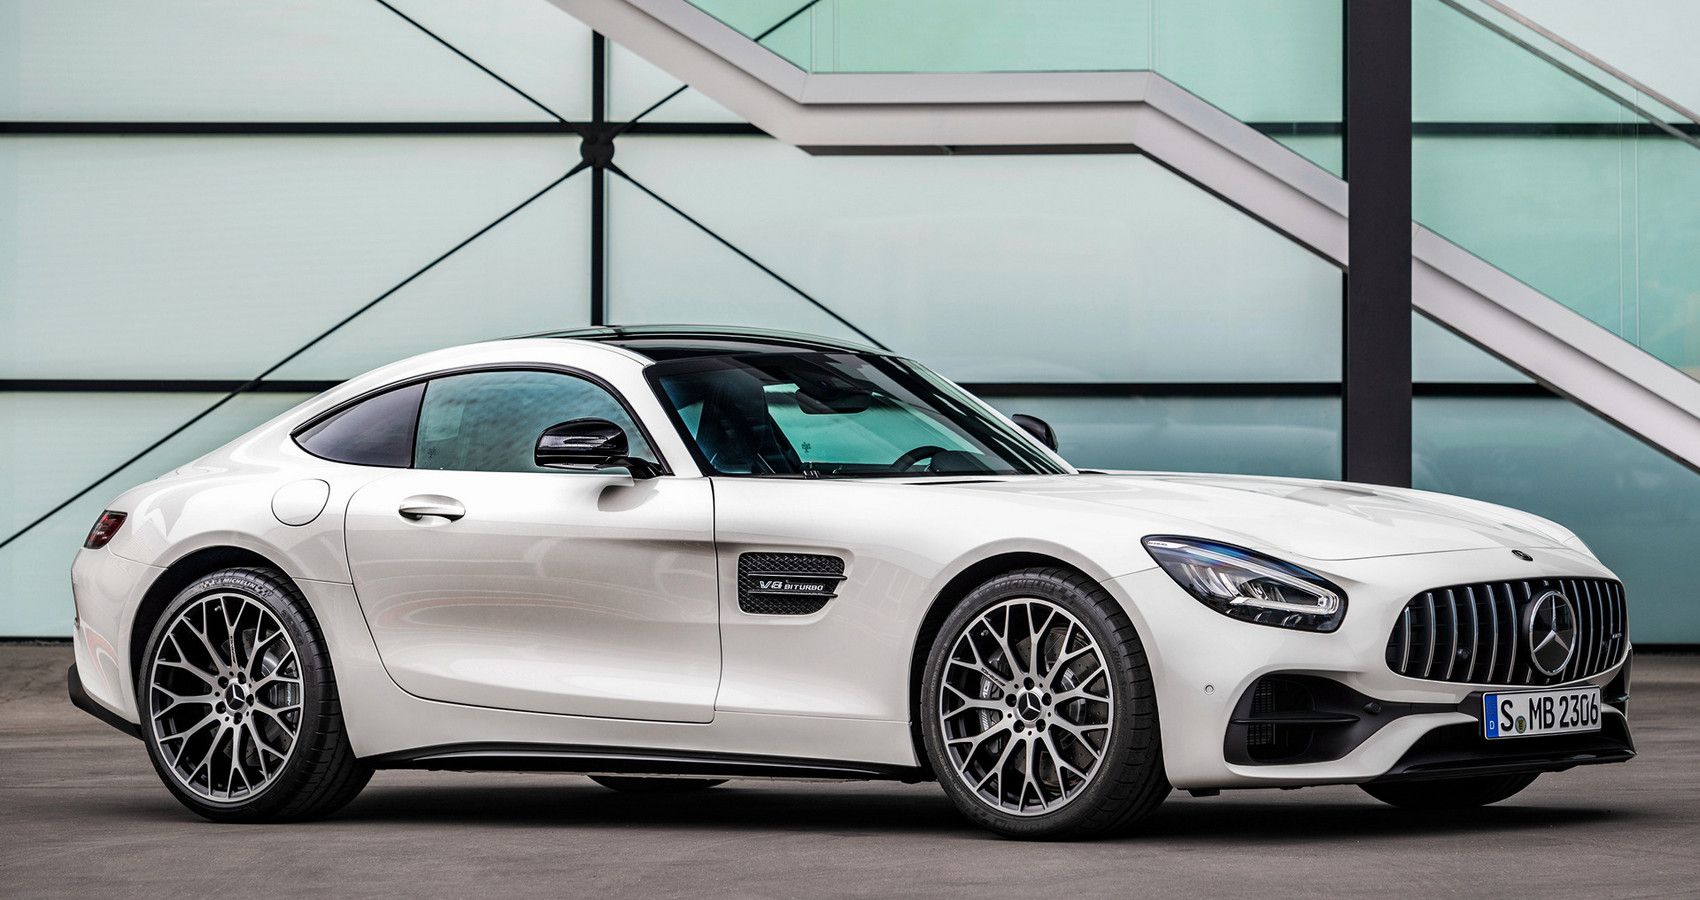 Mercedes-AMG-GT coupe - Front